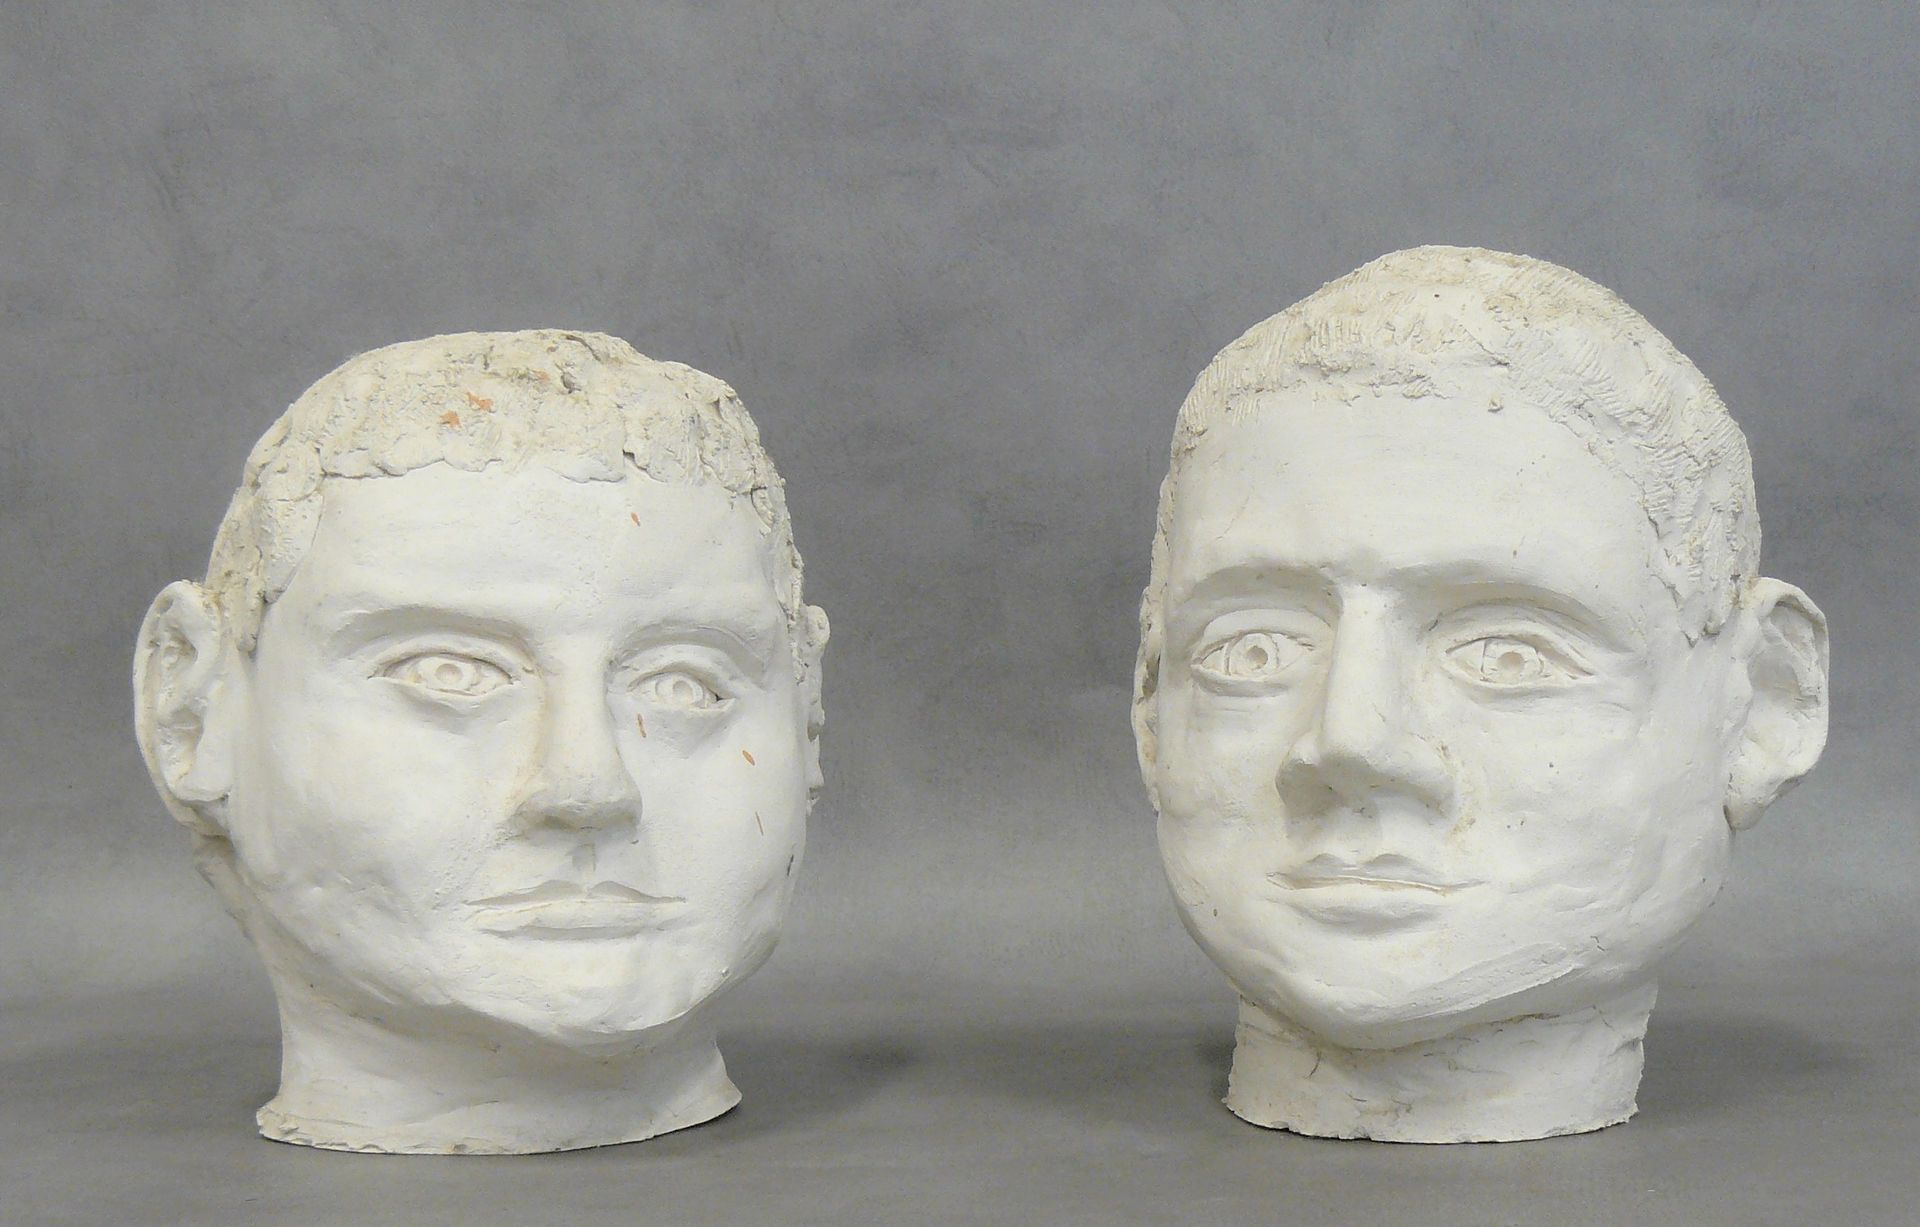 Null two white terracotta heads - H 19 and H 20 cm